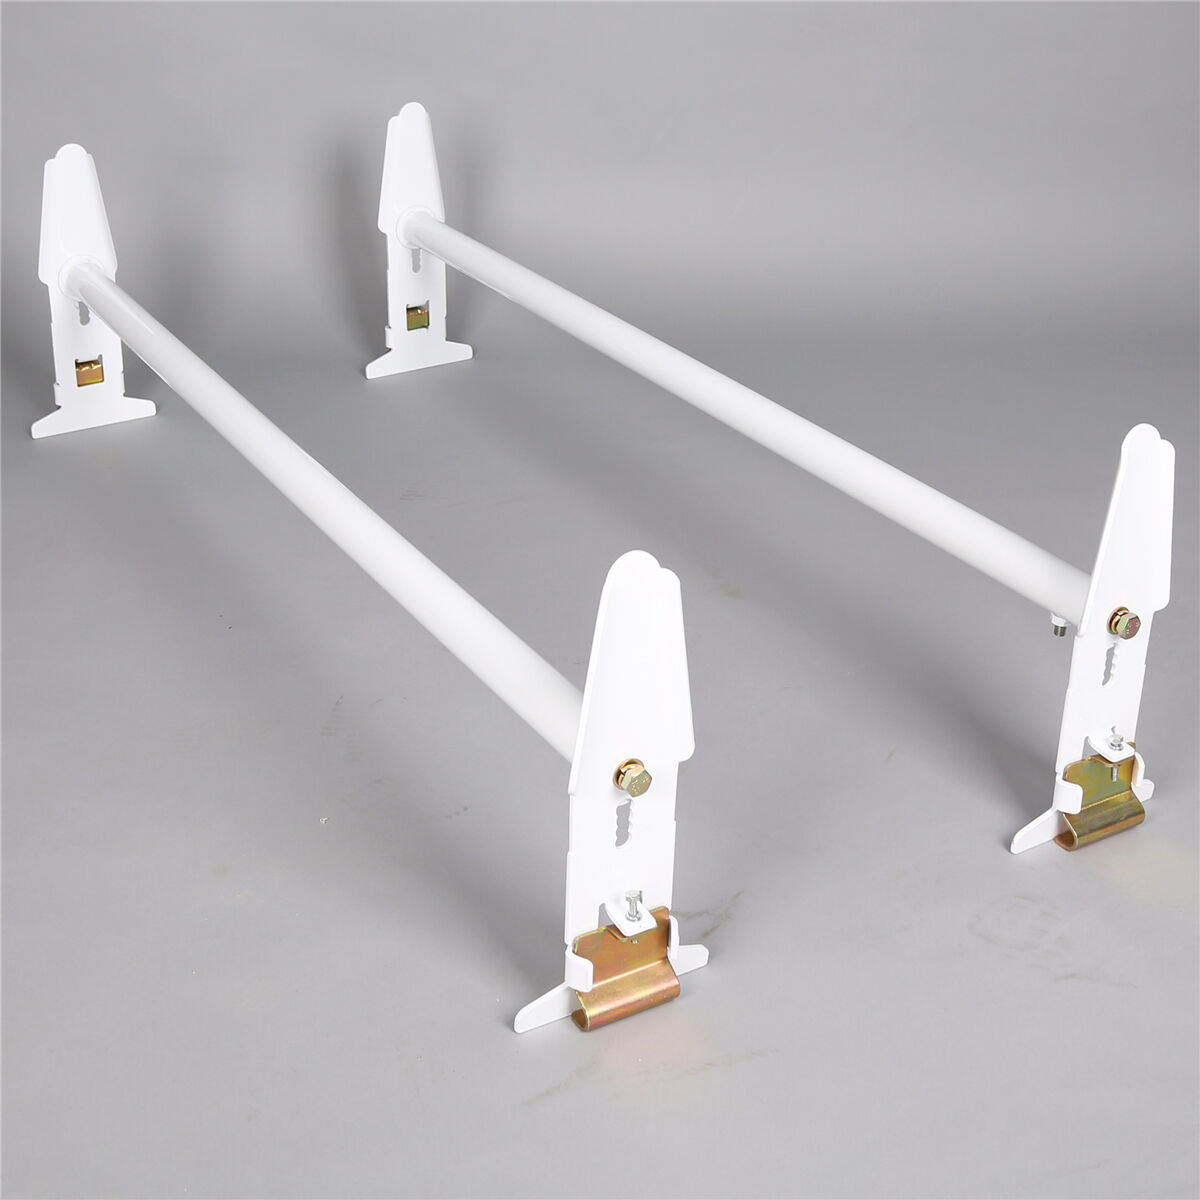 Adjustable Van Roof Ladder Rack 2Bars For Chevy Ford GMC Express Universal